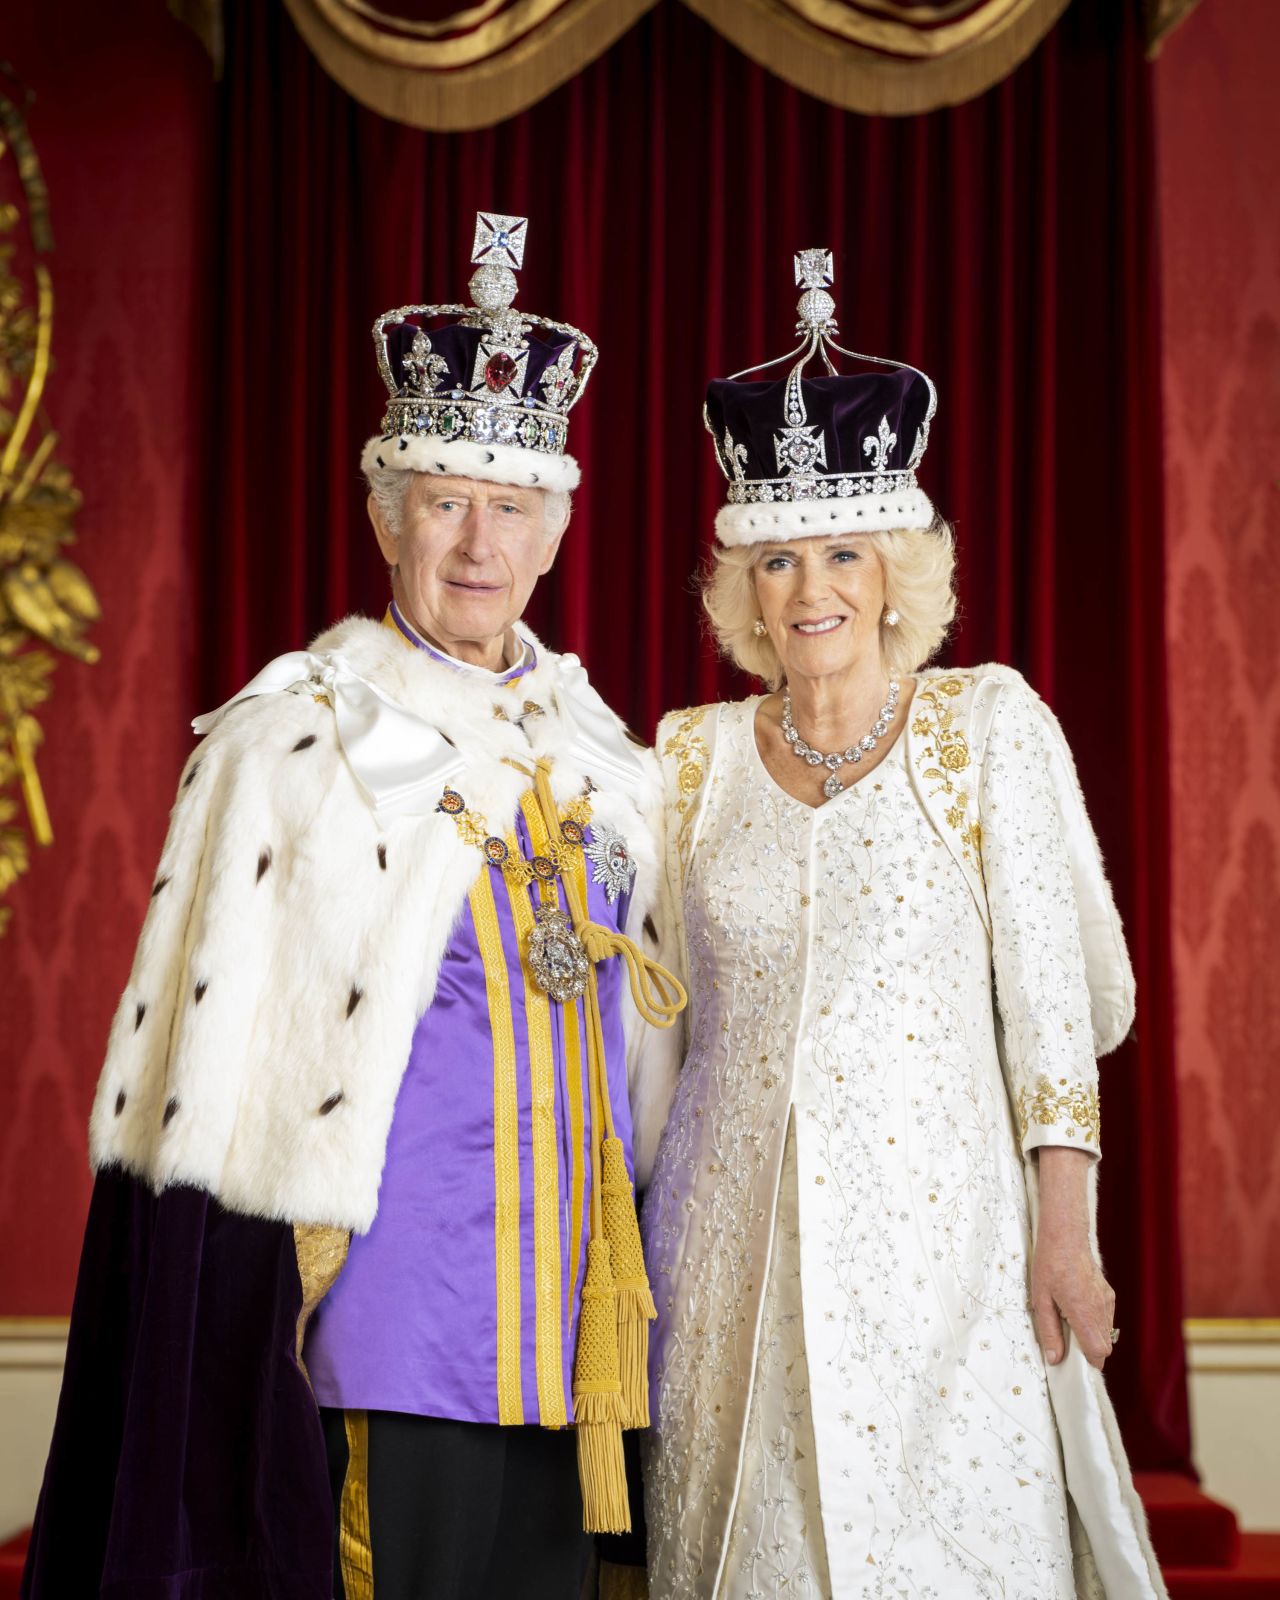 The King and Queen pose for a portrait in Buckingham Palace.